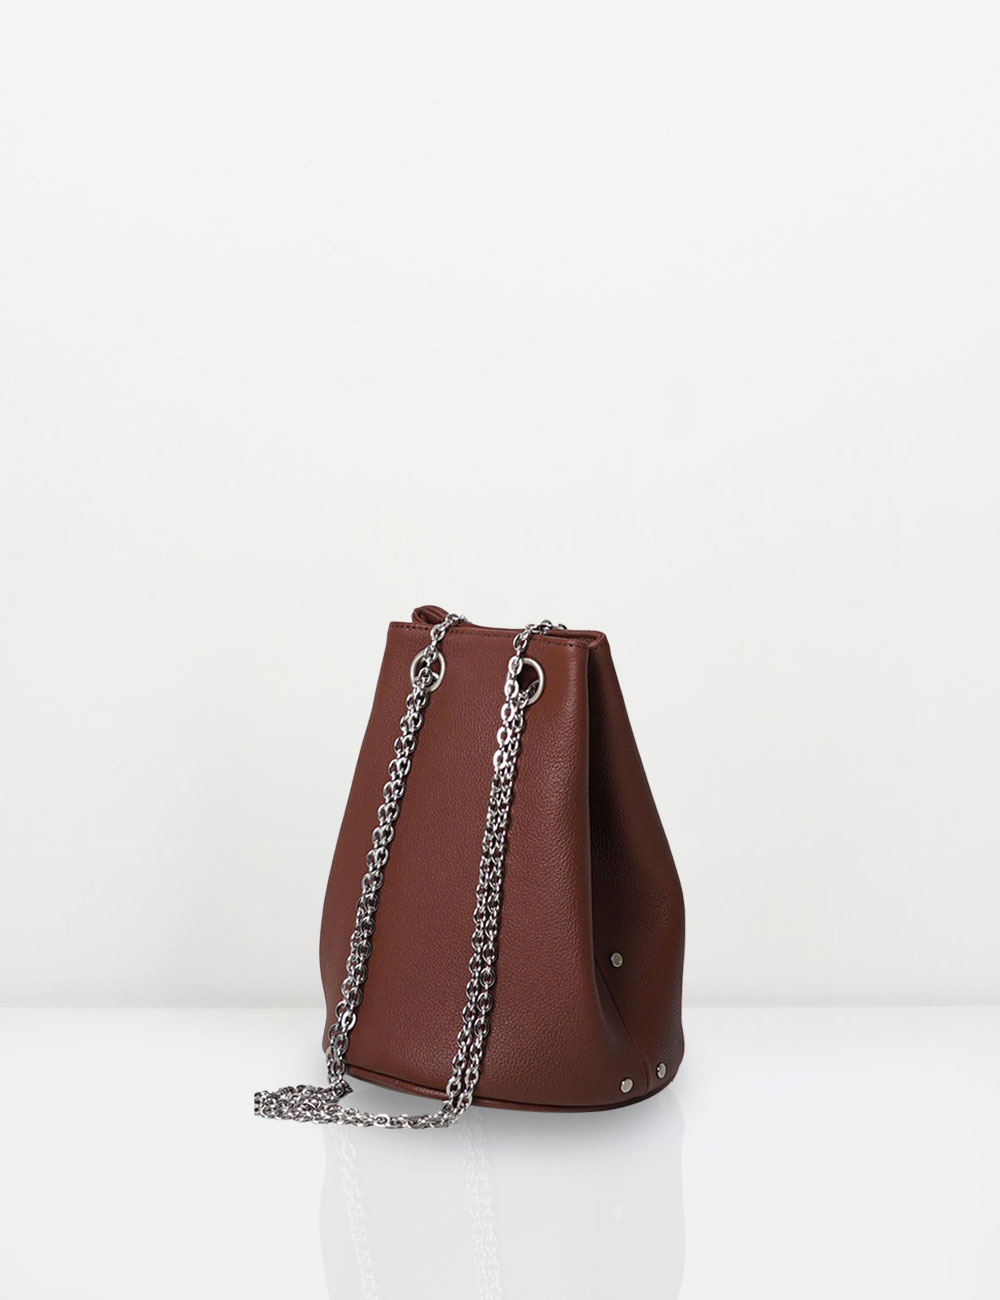 12mini chain bag / mild brown (sold out)